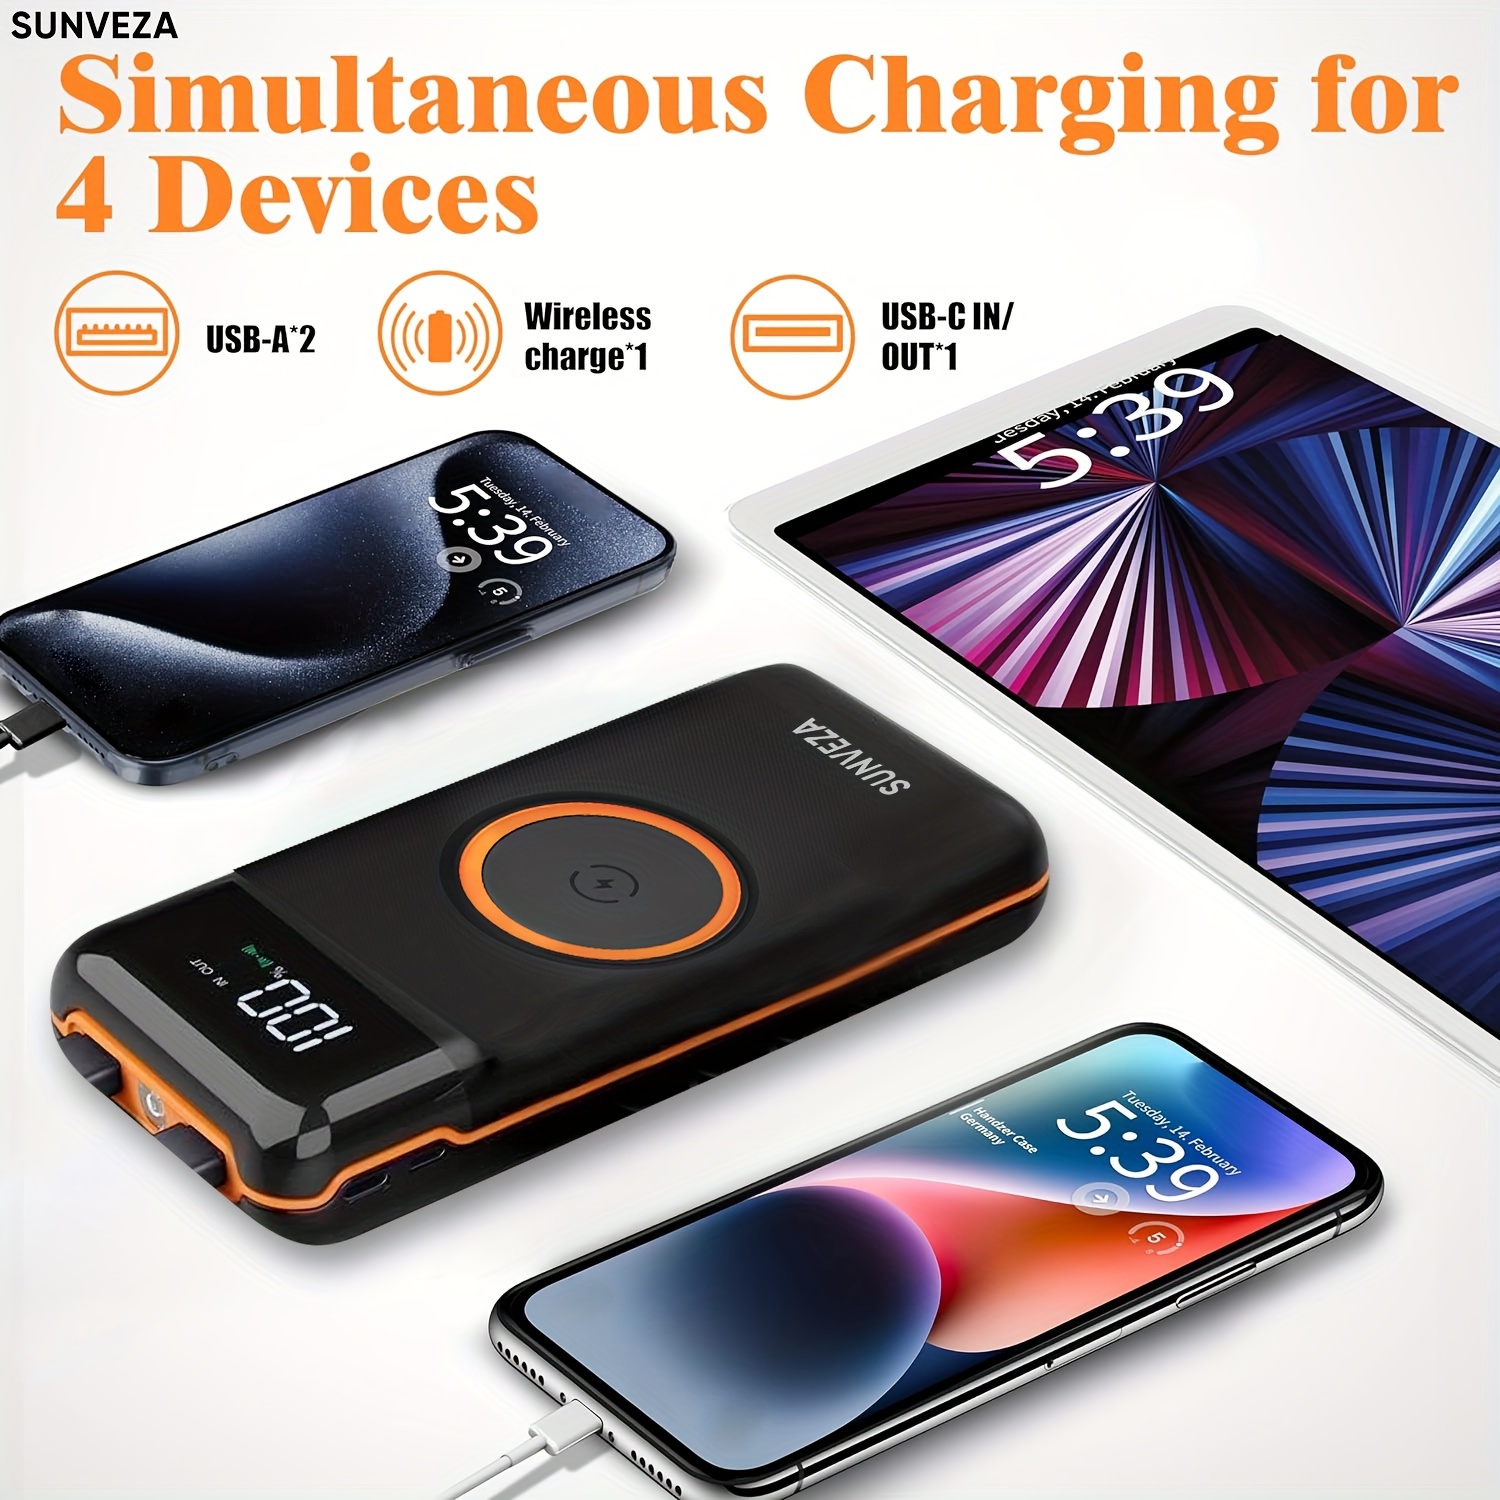 

Sunveza Portable Power Bank Charger - 40000mah With Flashlight, 5v3.1a Fast Charger & Built-in Cables. 10w Wireless Charger For Smart Devices & Phones. (orange)-yd887